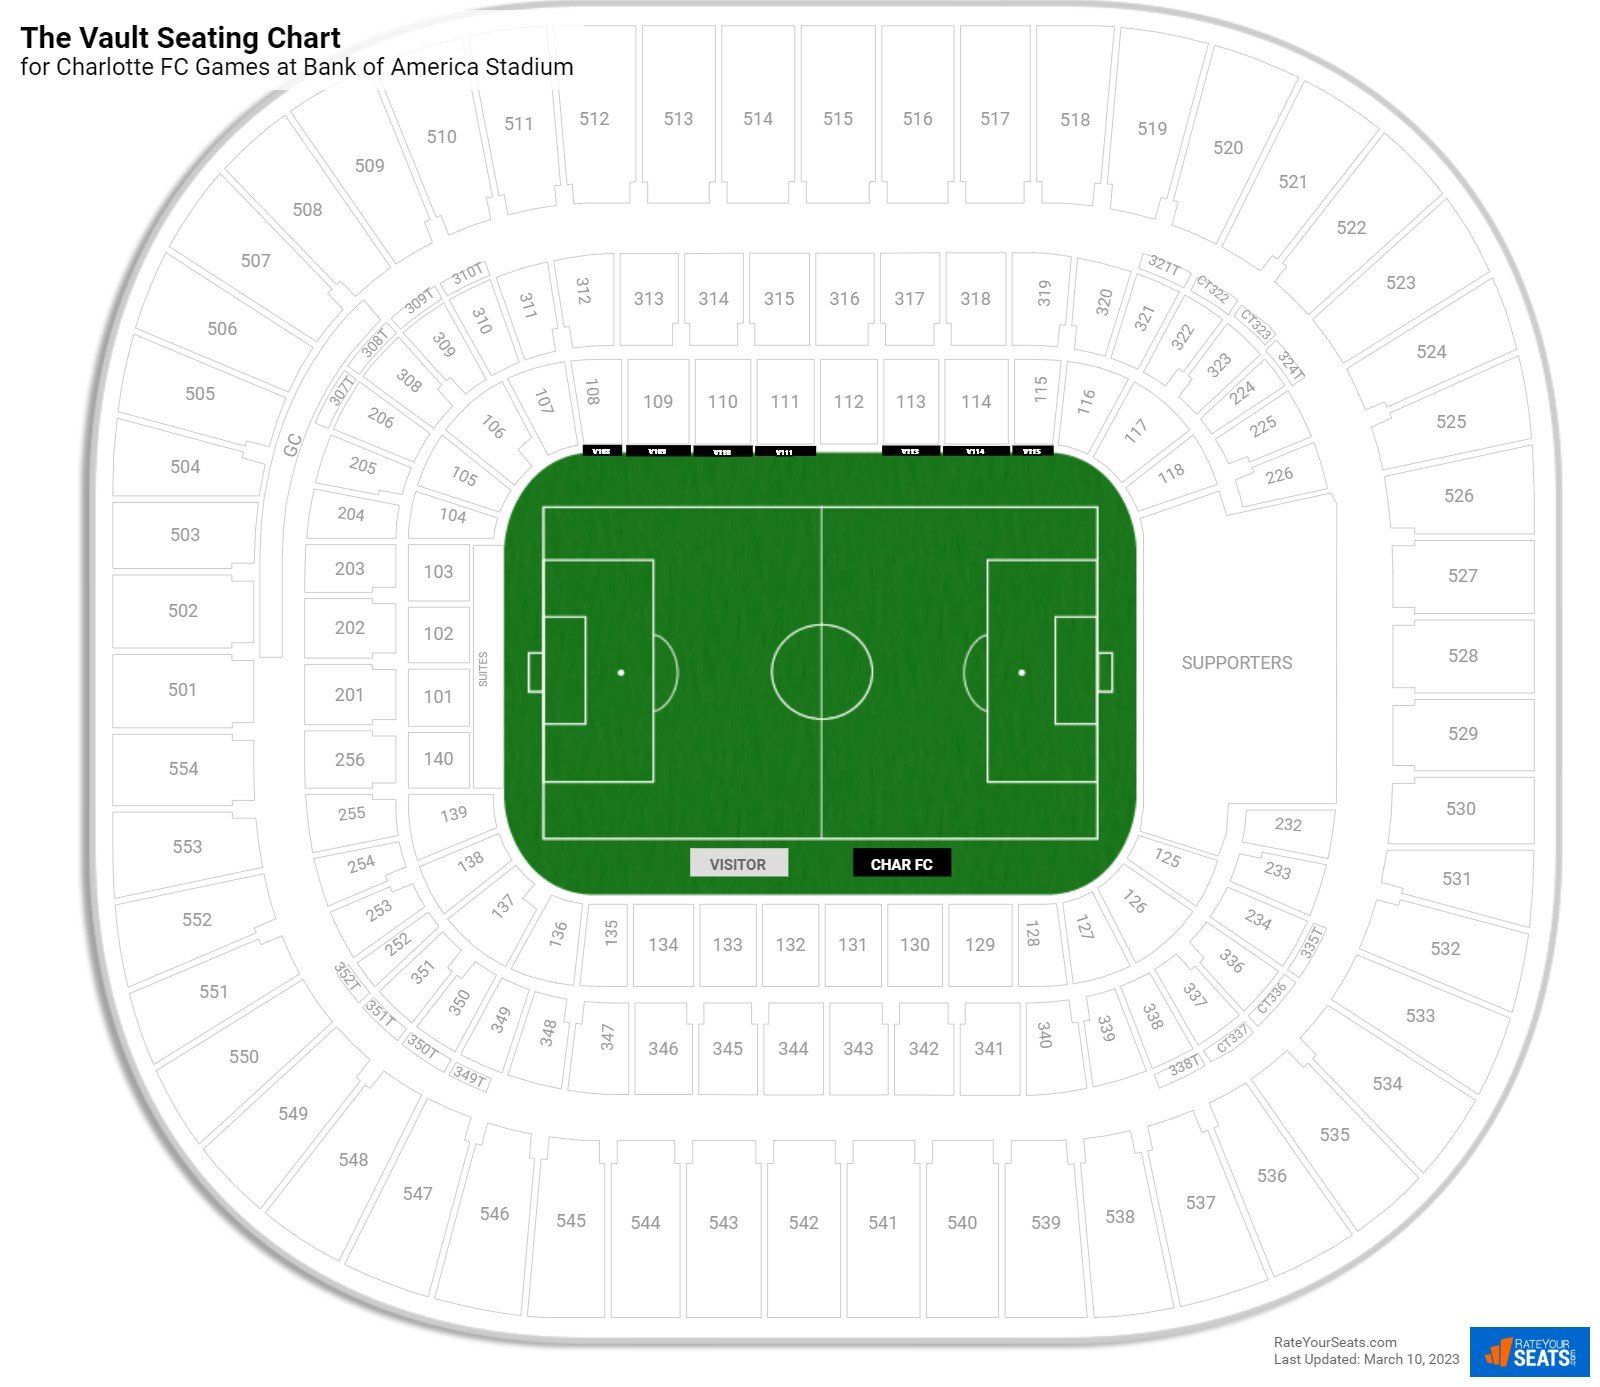 Charlotte FC The Vault Seating Chart at Bank of America Stadium